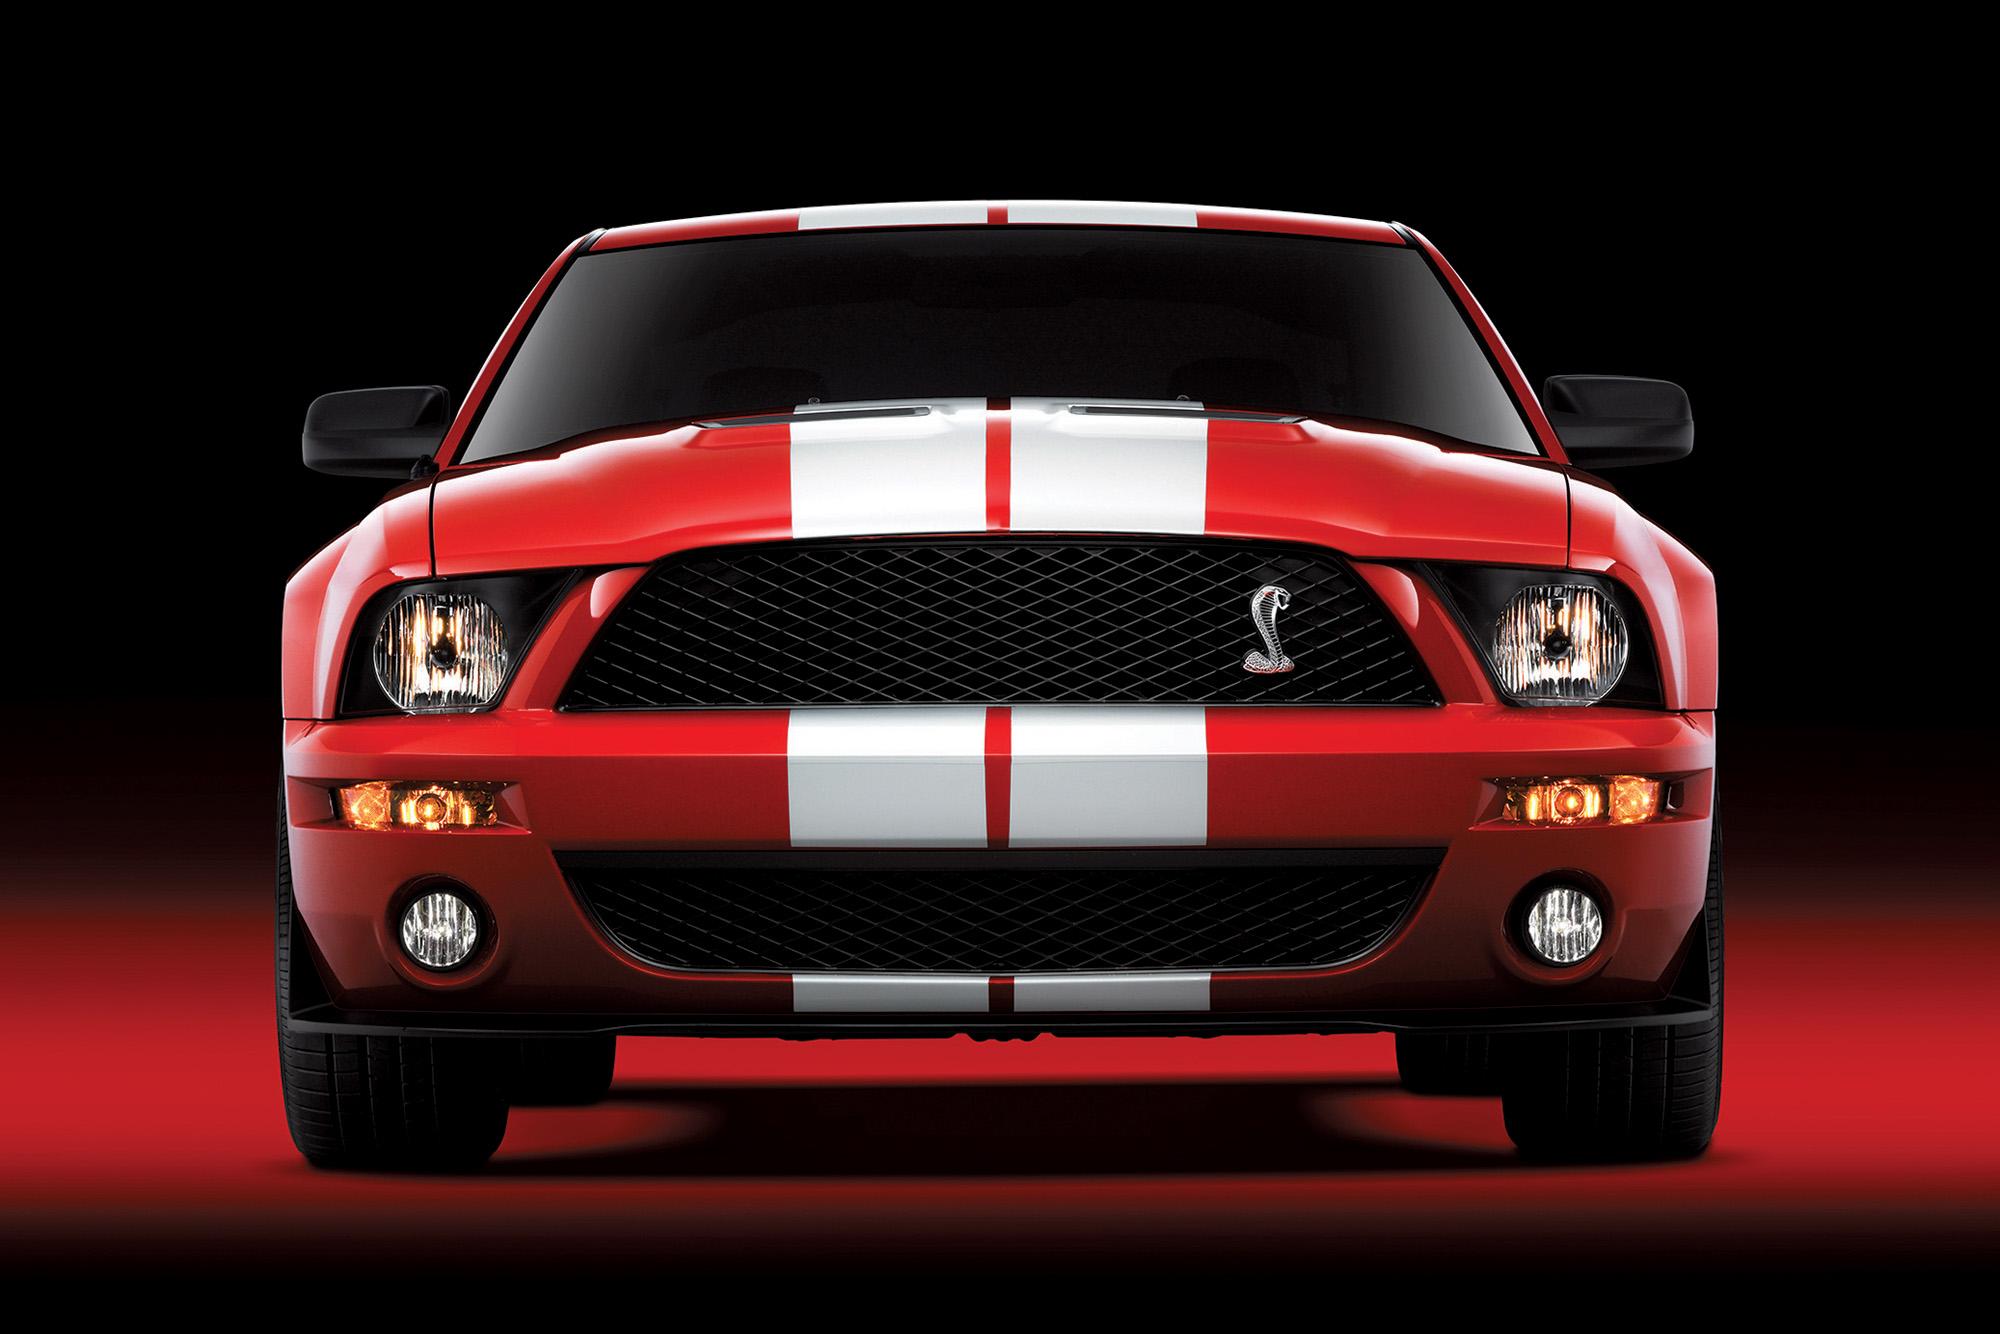 The Shelby Mustang's return created a new collectible